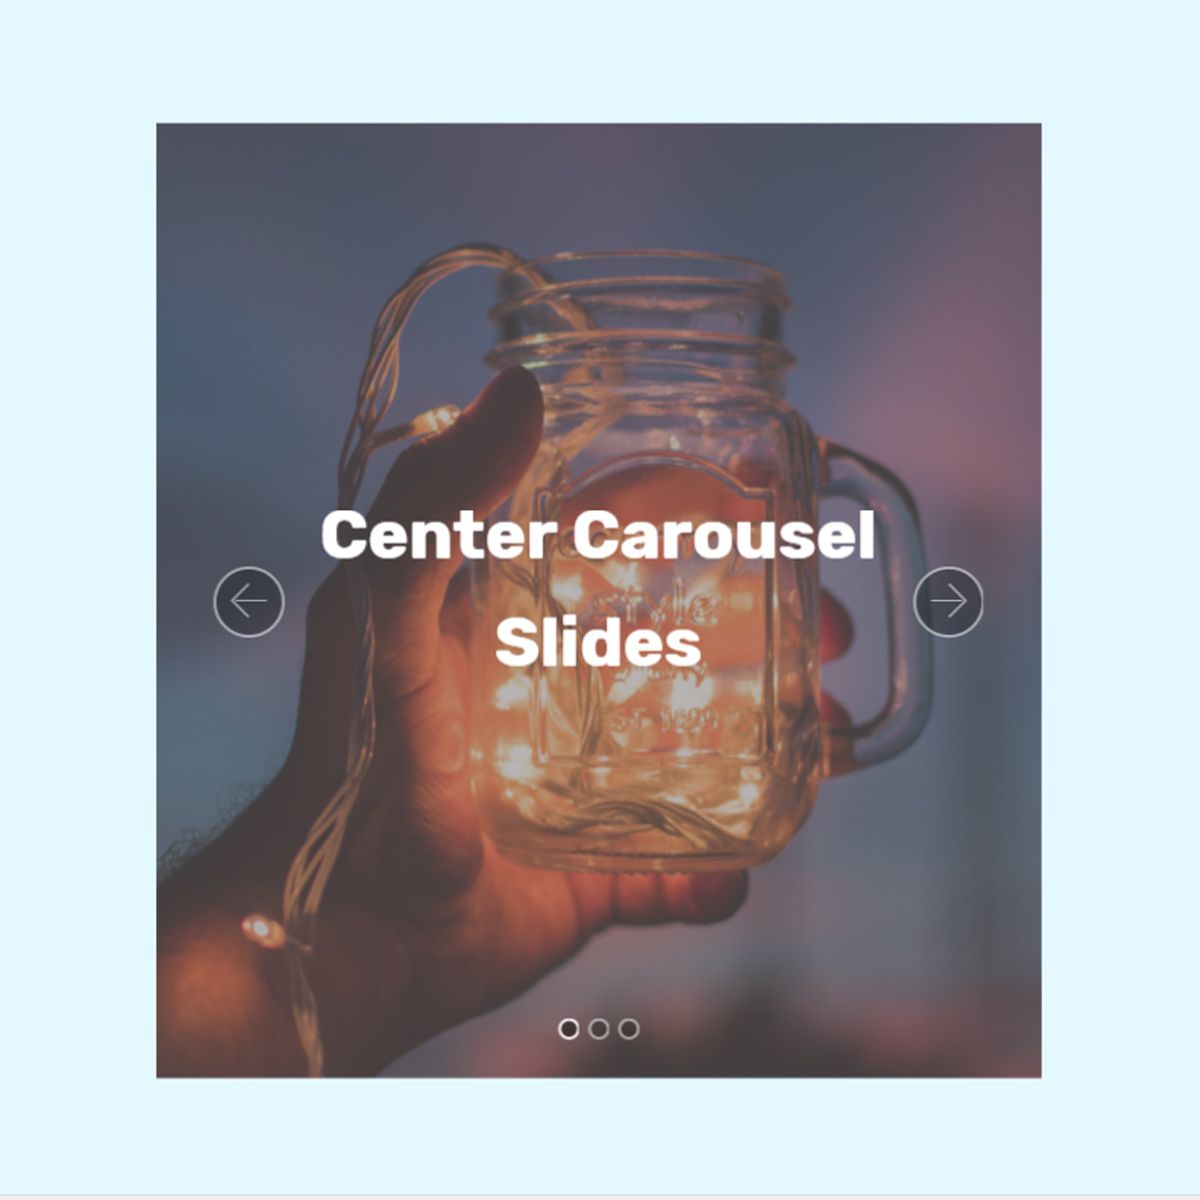 Free Bootstrap Picture Carousel